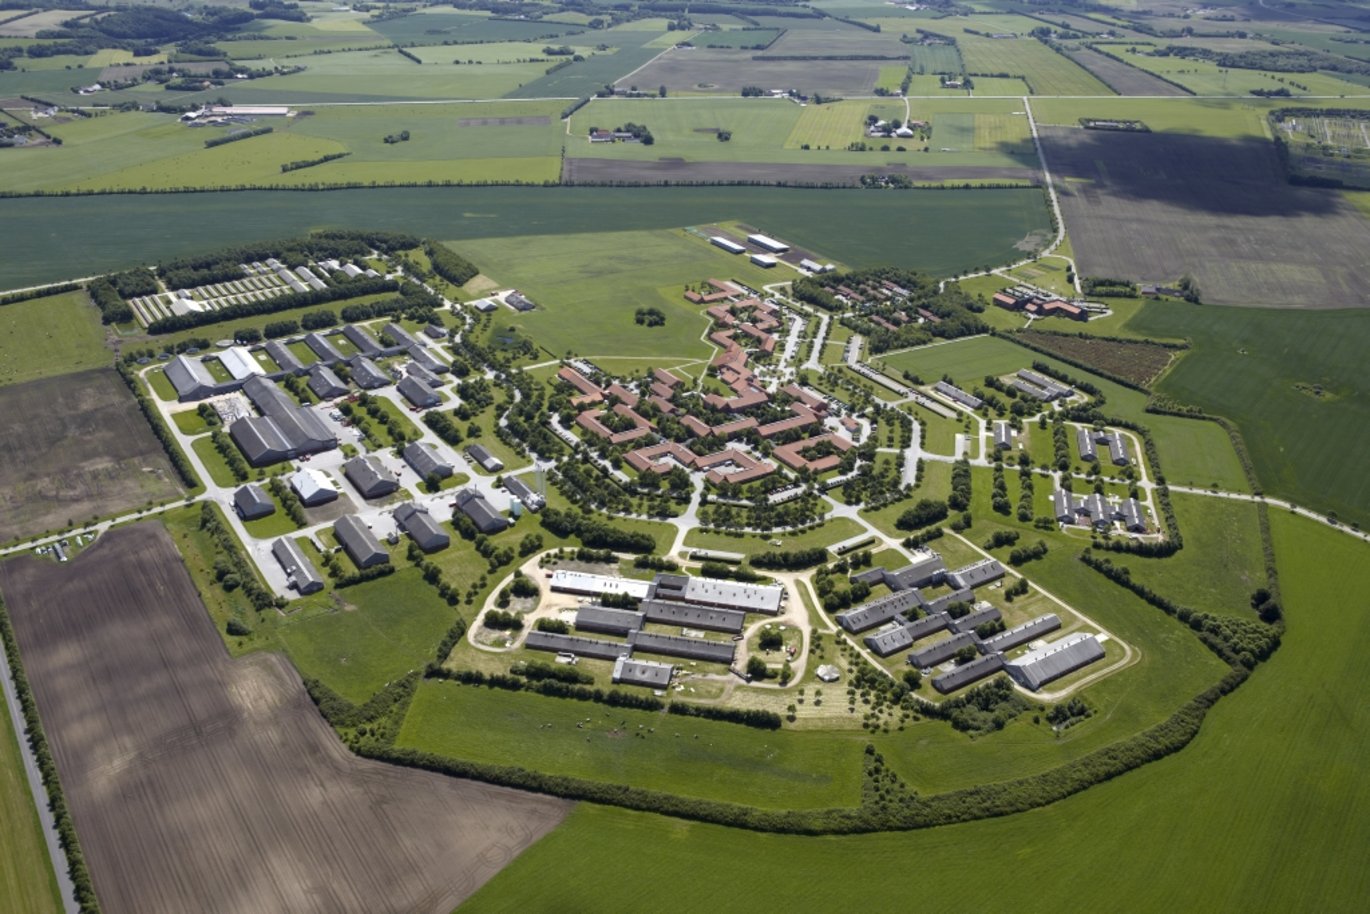 AU Viborg in Foulum has now officially been given the green light to launch its new degree programmes in Animal science, and Plant and Food science in 2024. Photo: AU Foto